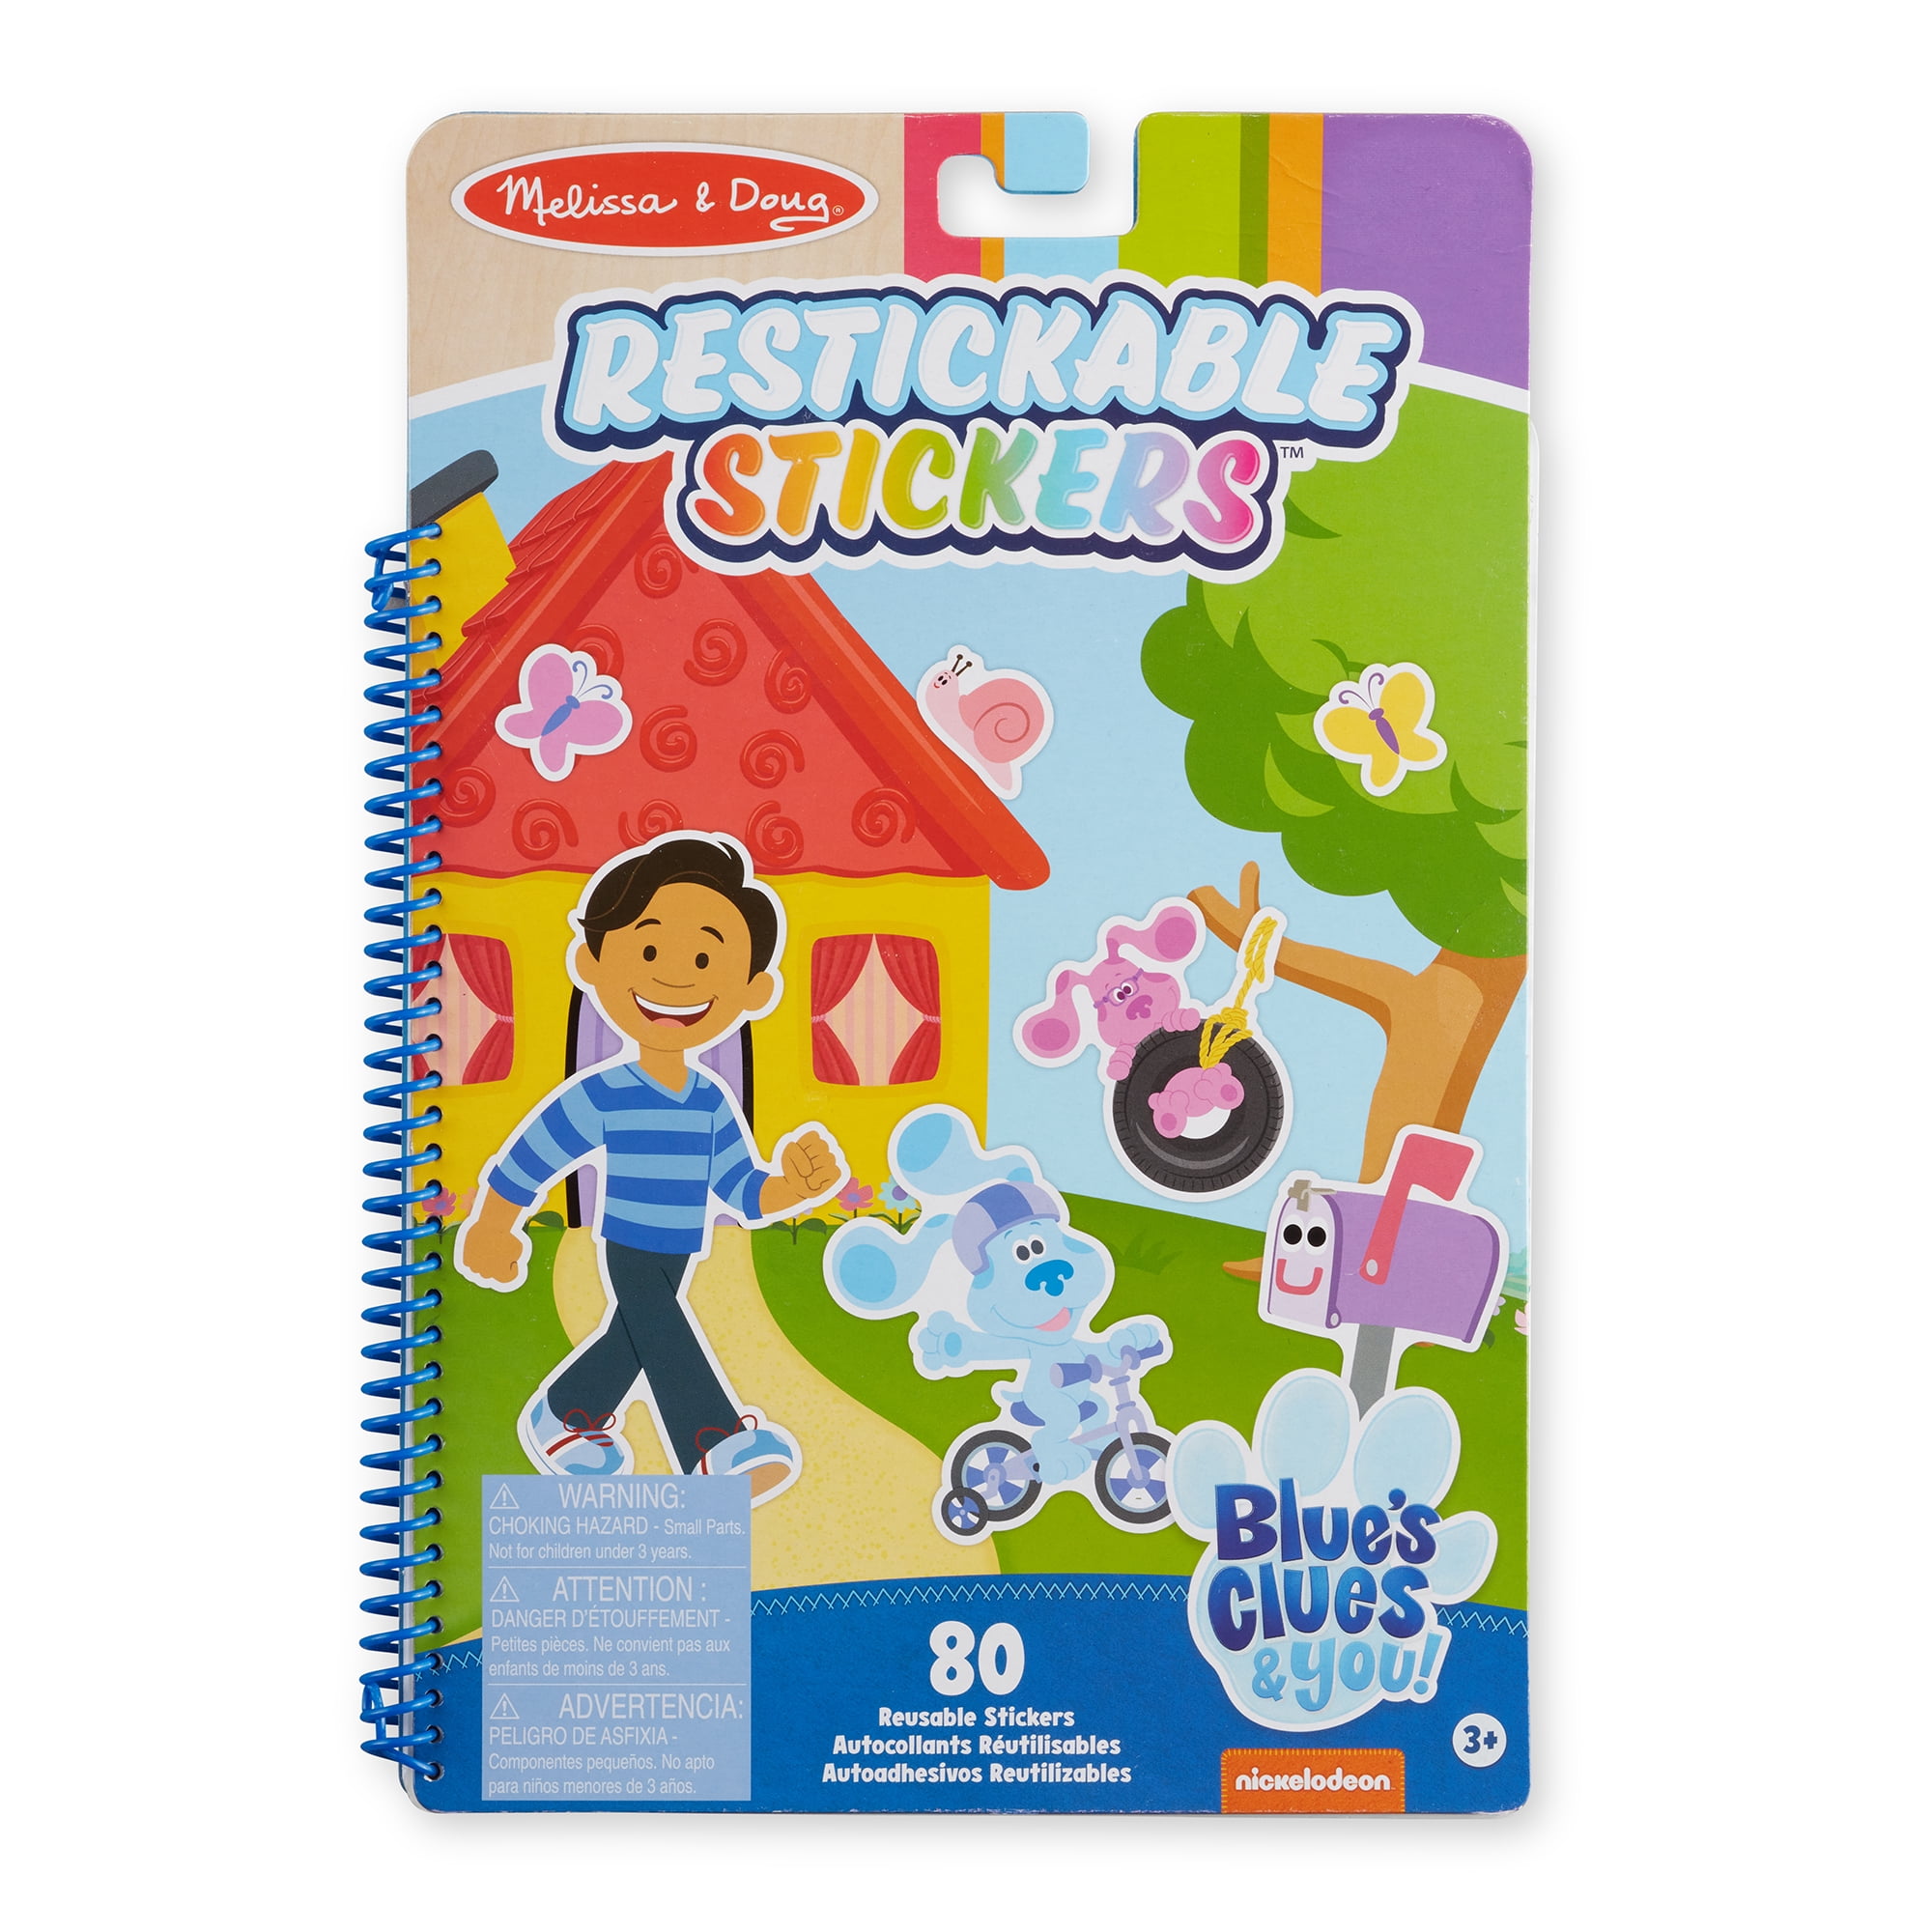 Blue's Clues Potty Training Stickers Bundle - Over 295 Blue's Clues Reward Stickers for Toddlers Plus Beach Kids Door Hanger | Blue's Clues Stickers